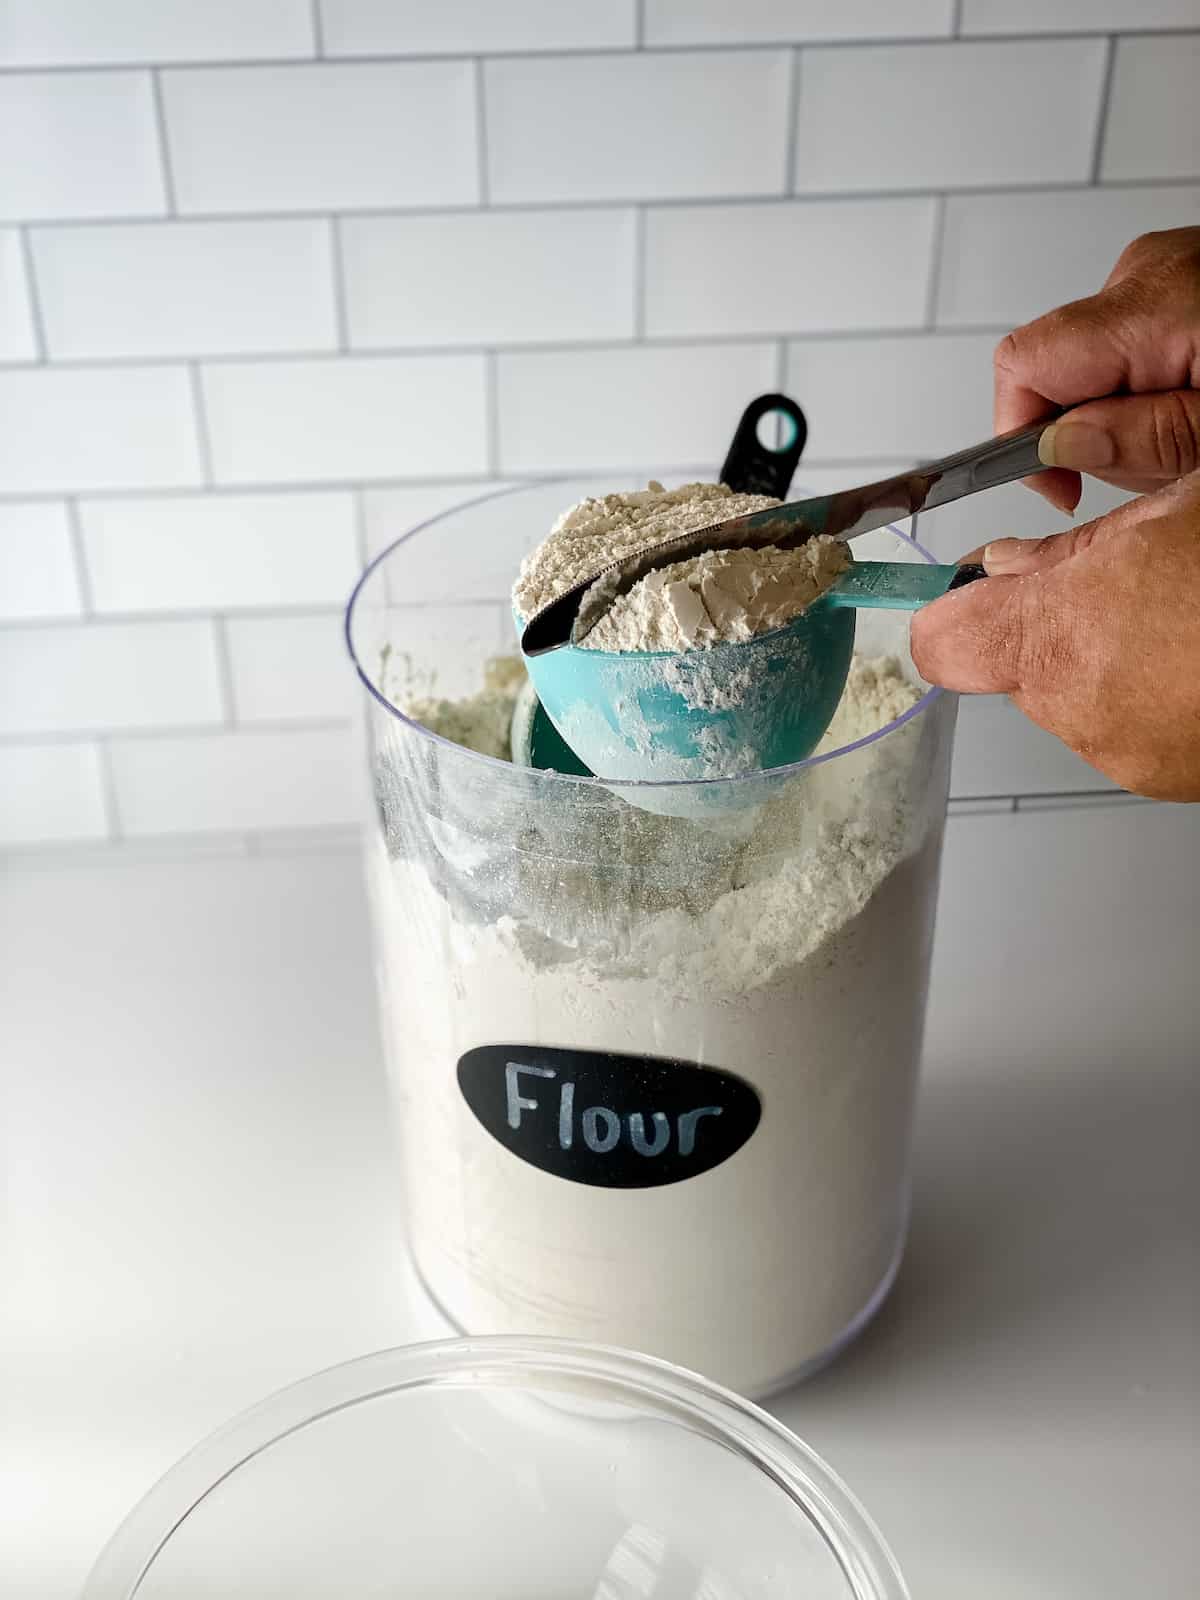 Measuring flour with a blue cup and container of flour.